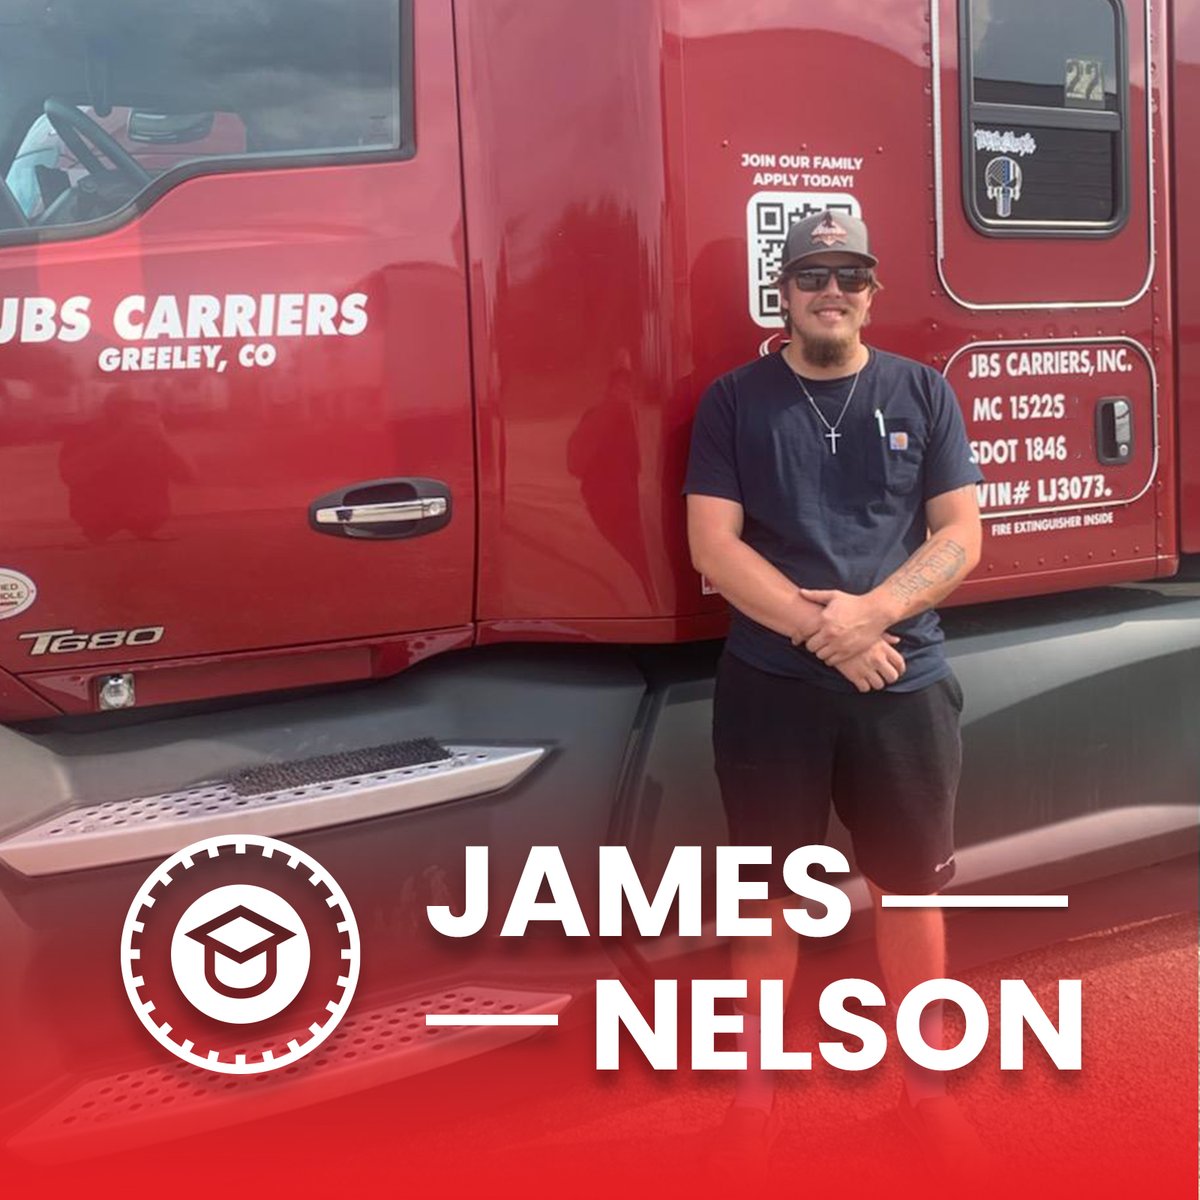 Congratulations to James, an Aims Community College graduate, who completed his training with his mentor last week!  We look forward to seeing you in Greeley.

#driveJBSstrong #bigrig #semitrucklife